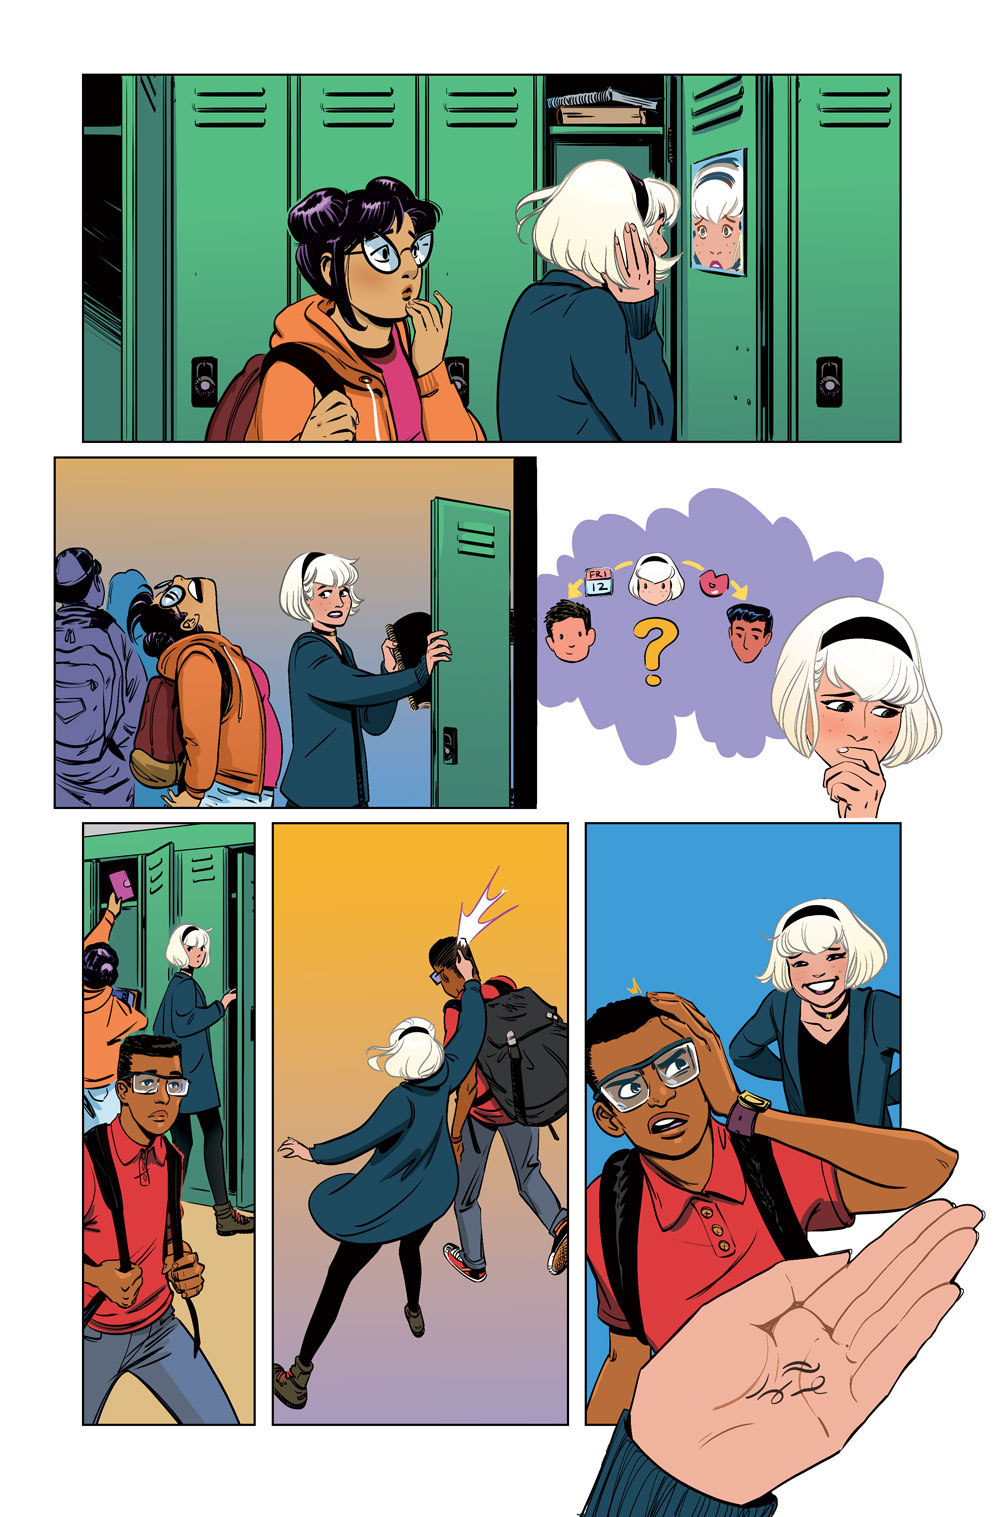 Sabrina the Teenage Witch #4 preview page 2